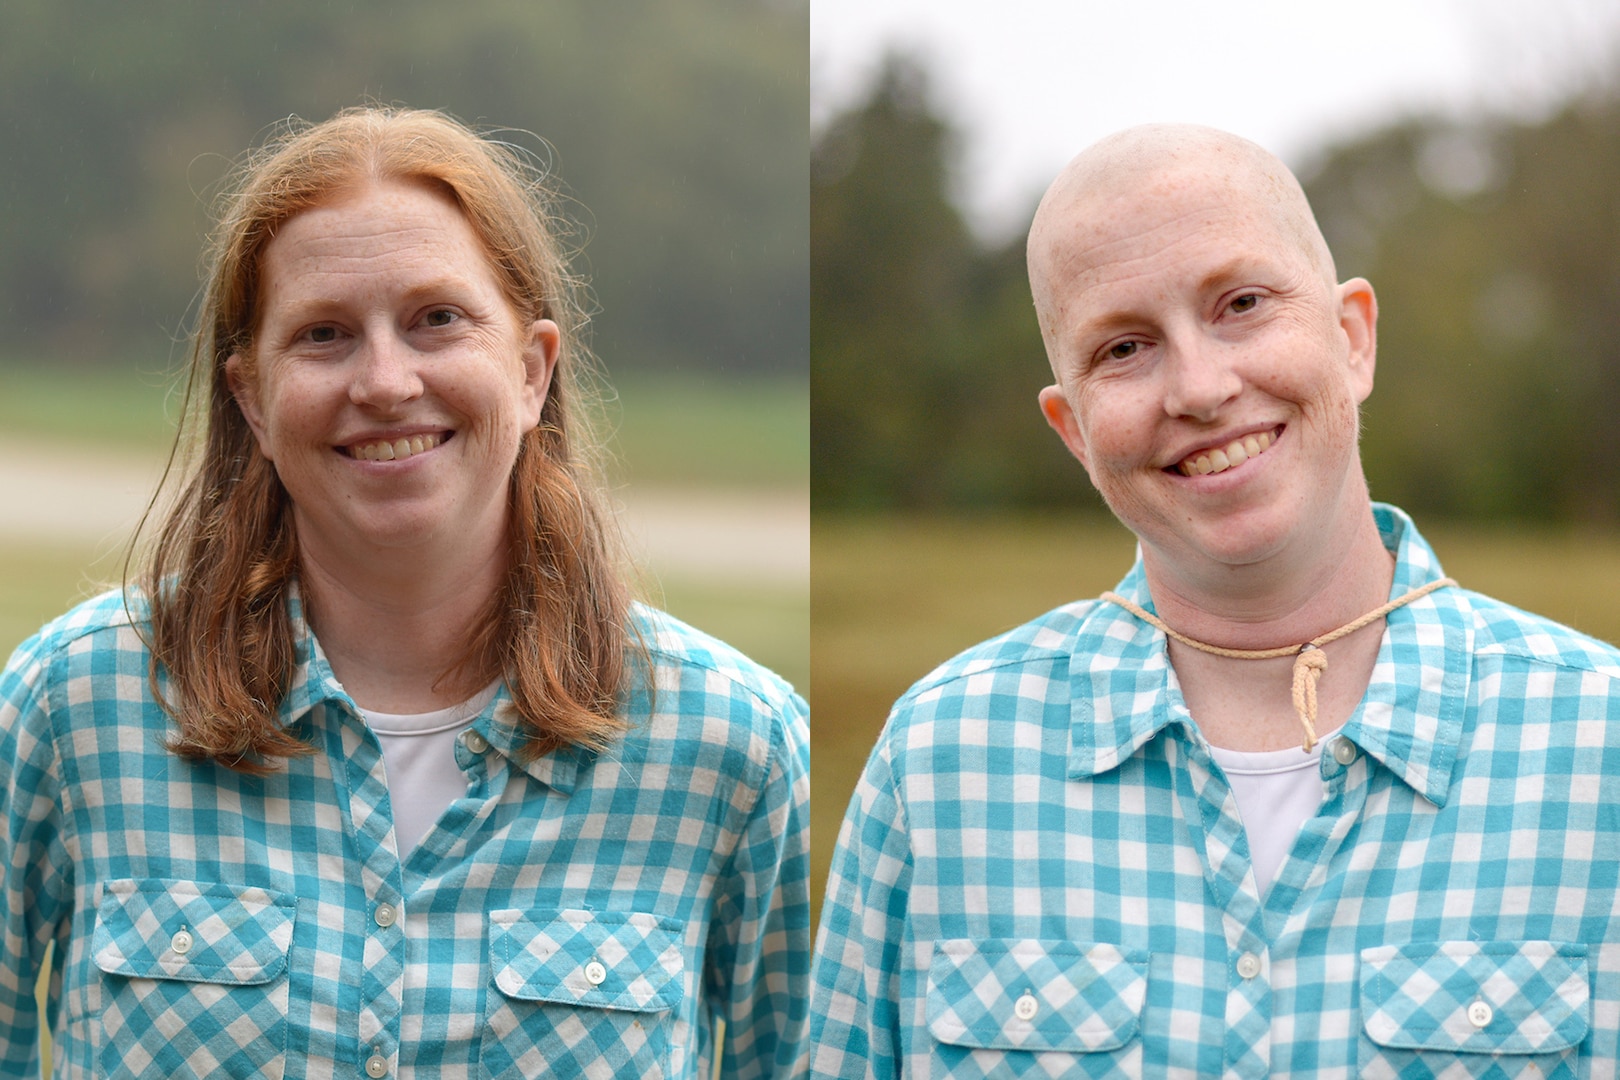 North Carolina National Guard Maj. Melissa Culbreth before and after she shaved her head during a party at Serenity Grace Farm on Oct. 12, 2014. Culbreth, who is the chaplain for the 449th Theater Aviation Brigade, recently started chemotherapy after being diagnosed with breast cancer for a third time and said she wanted to take her hair on her own terms before she lost it as a side effect of the chemo. 